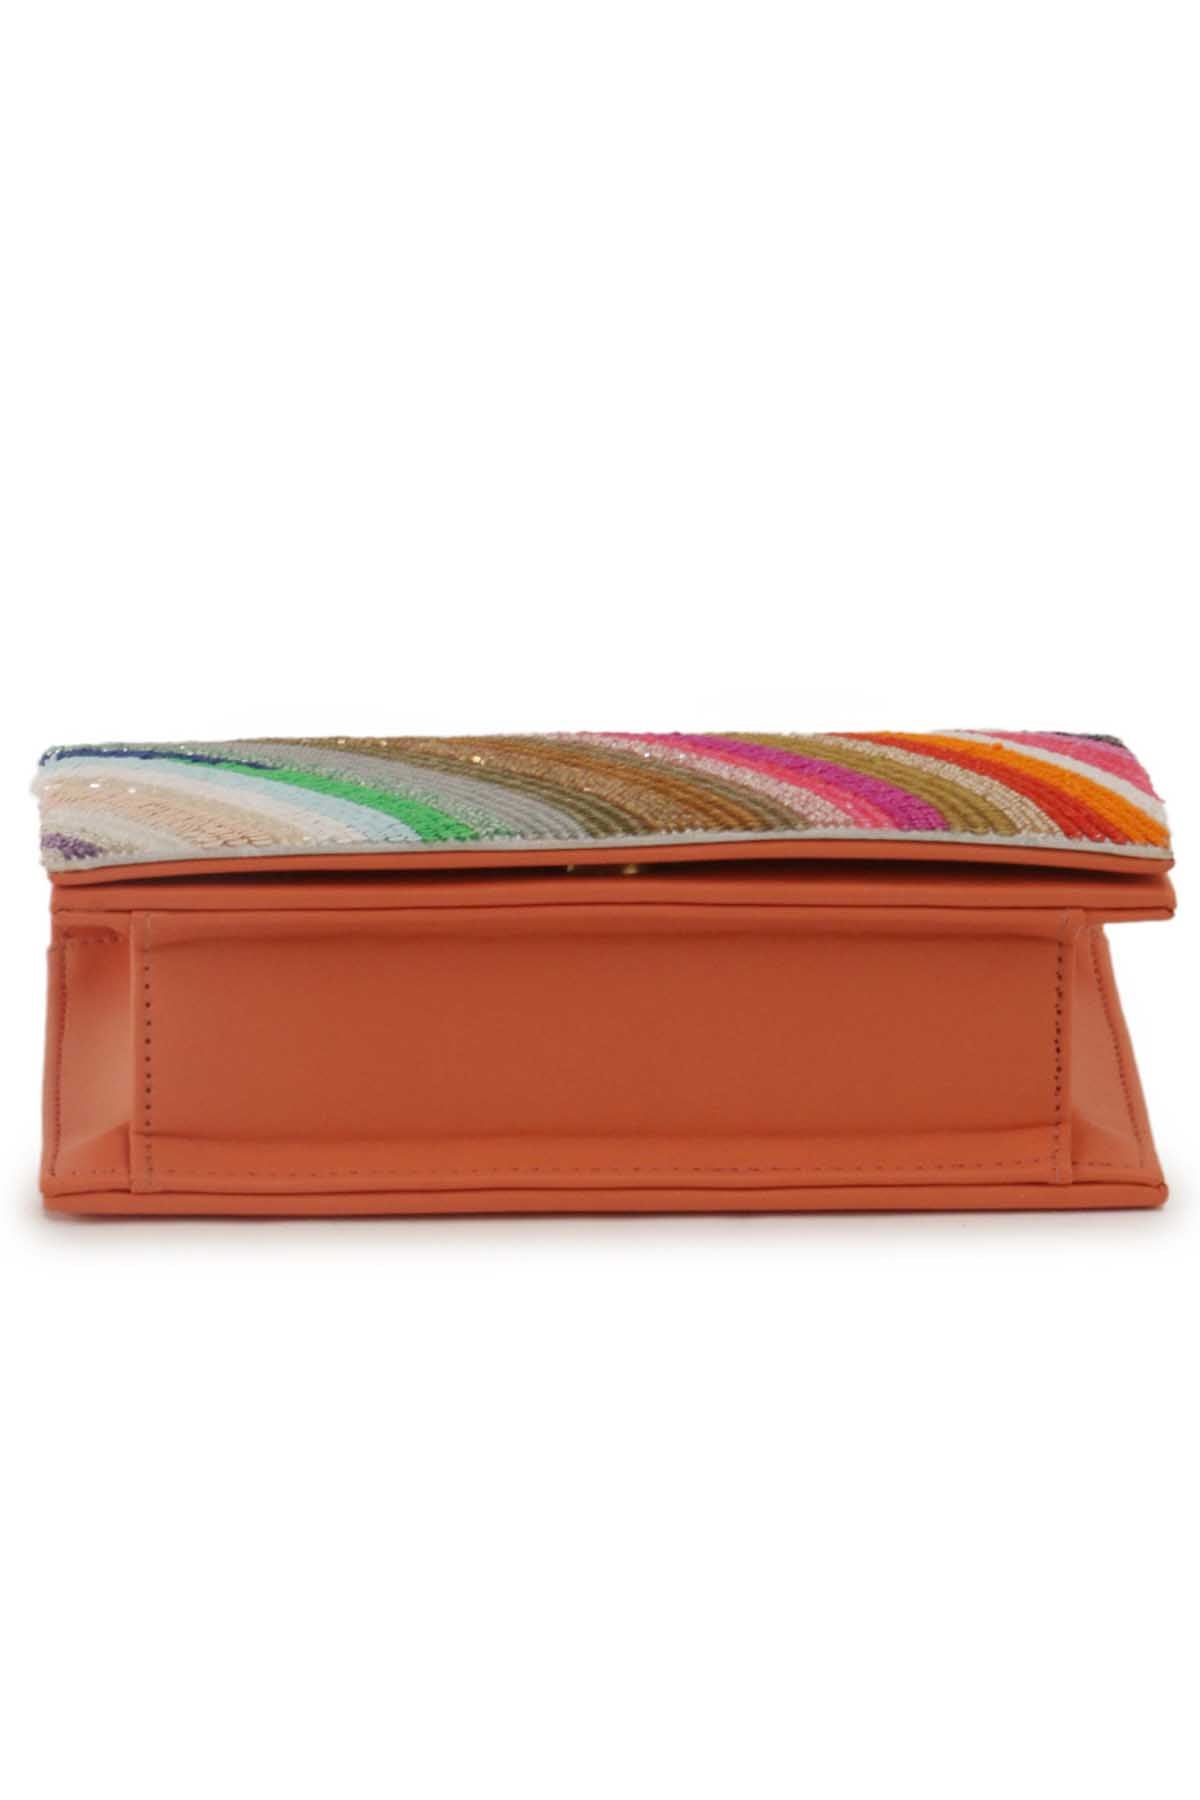 Rainbow Embroidered Clutch